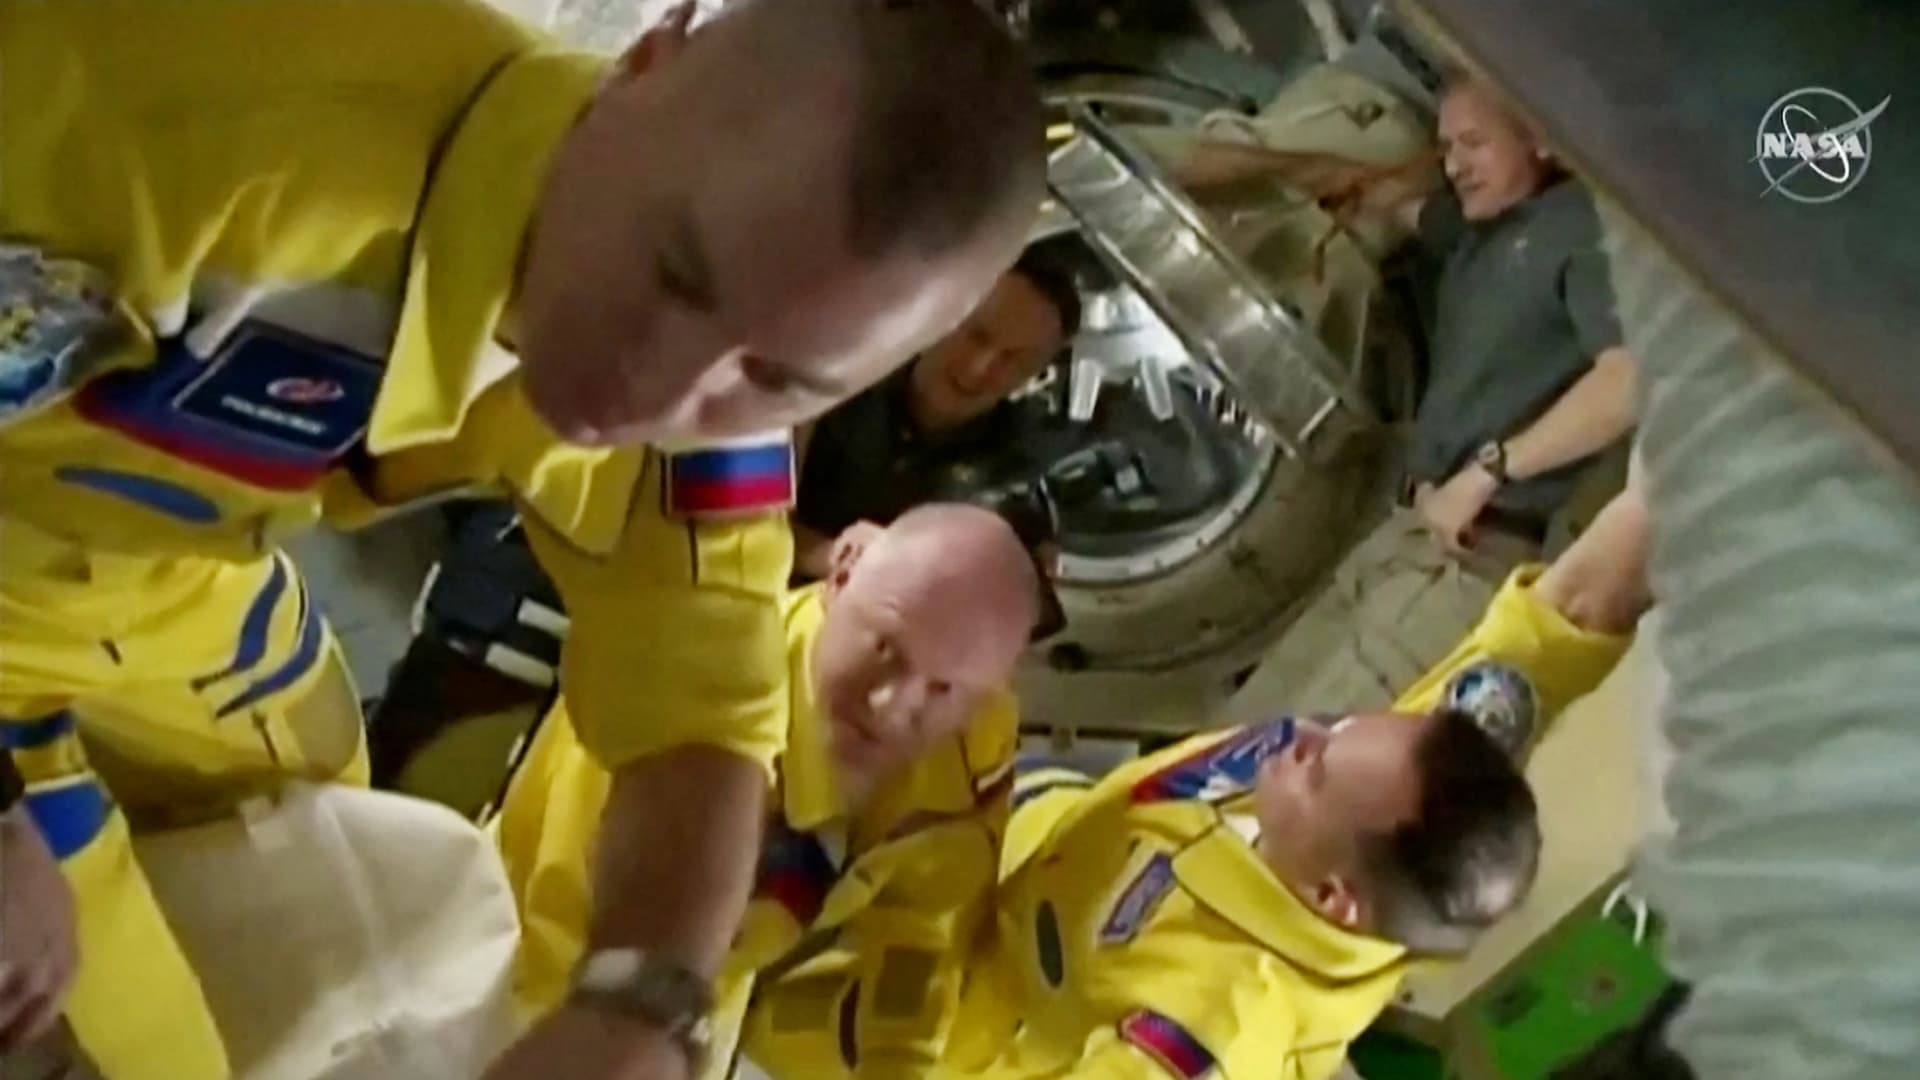 Russian cosmonauts Oleg Artemyev, Denis Matveev and Sergey Korsakov arrive wearing yellow and blue flight suits at the International Space Station after docking their Soyuz capsule March 18, 2022 i a still image from video. Video taken March 18, 2022.